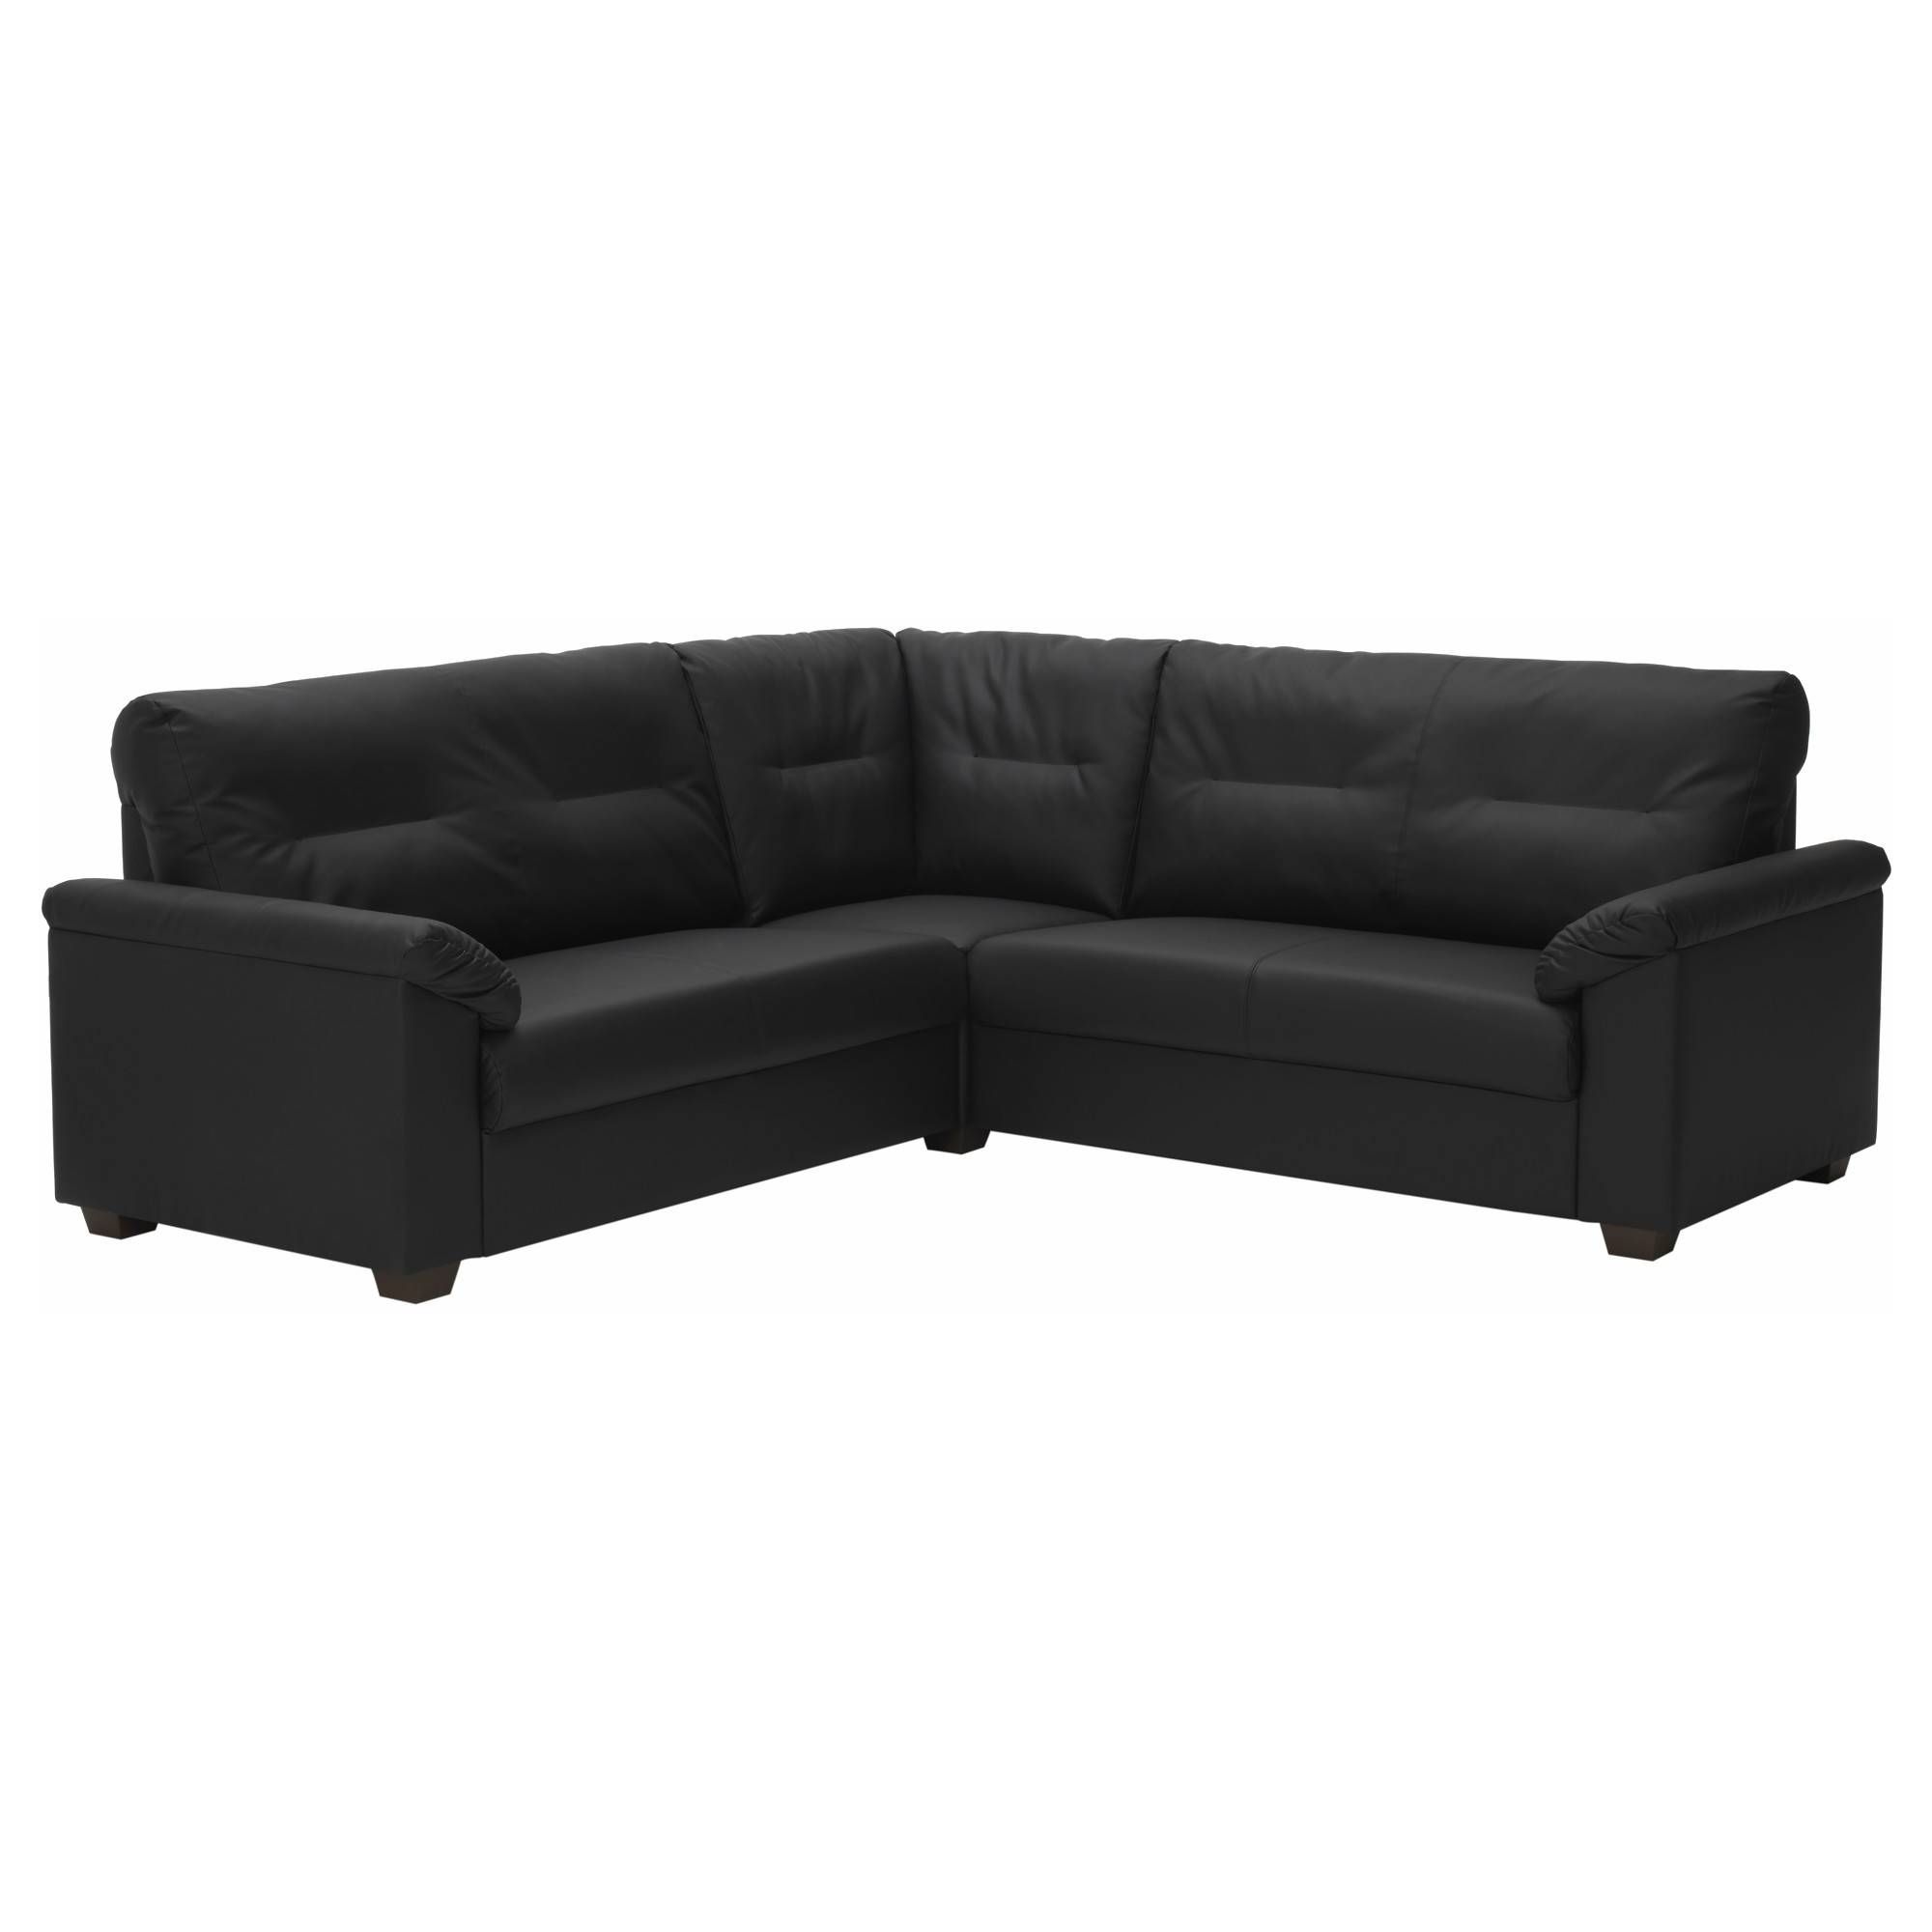 Faux Leather Sectional Sofas – Ikea For Faux Leather Sectional Sofas (View 19 of 25)